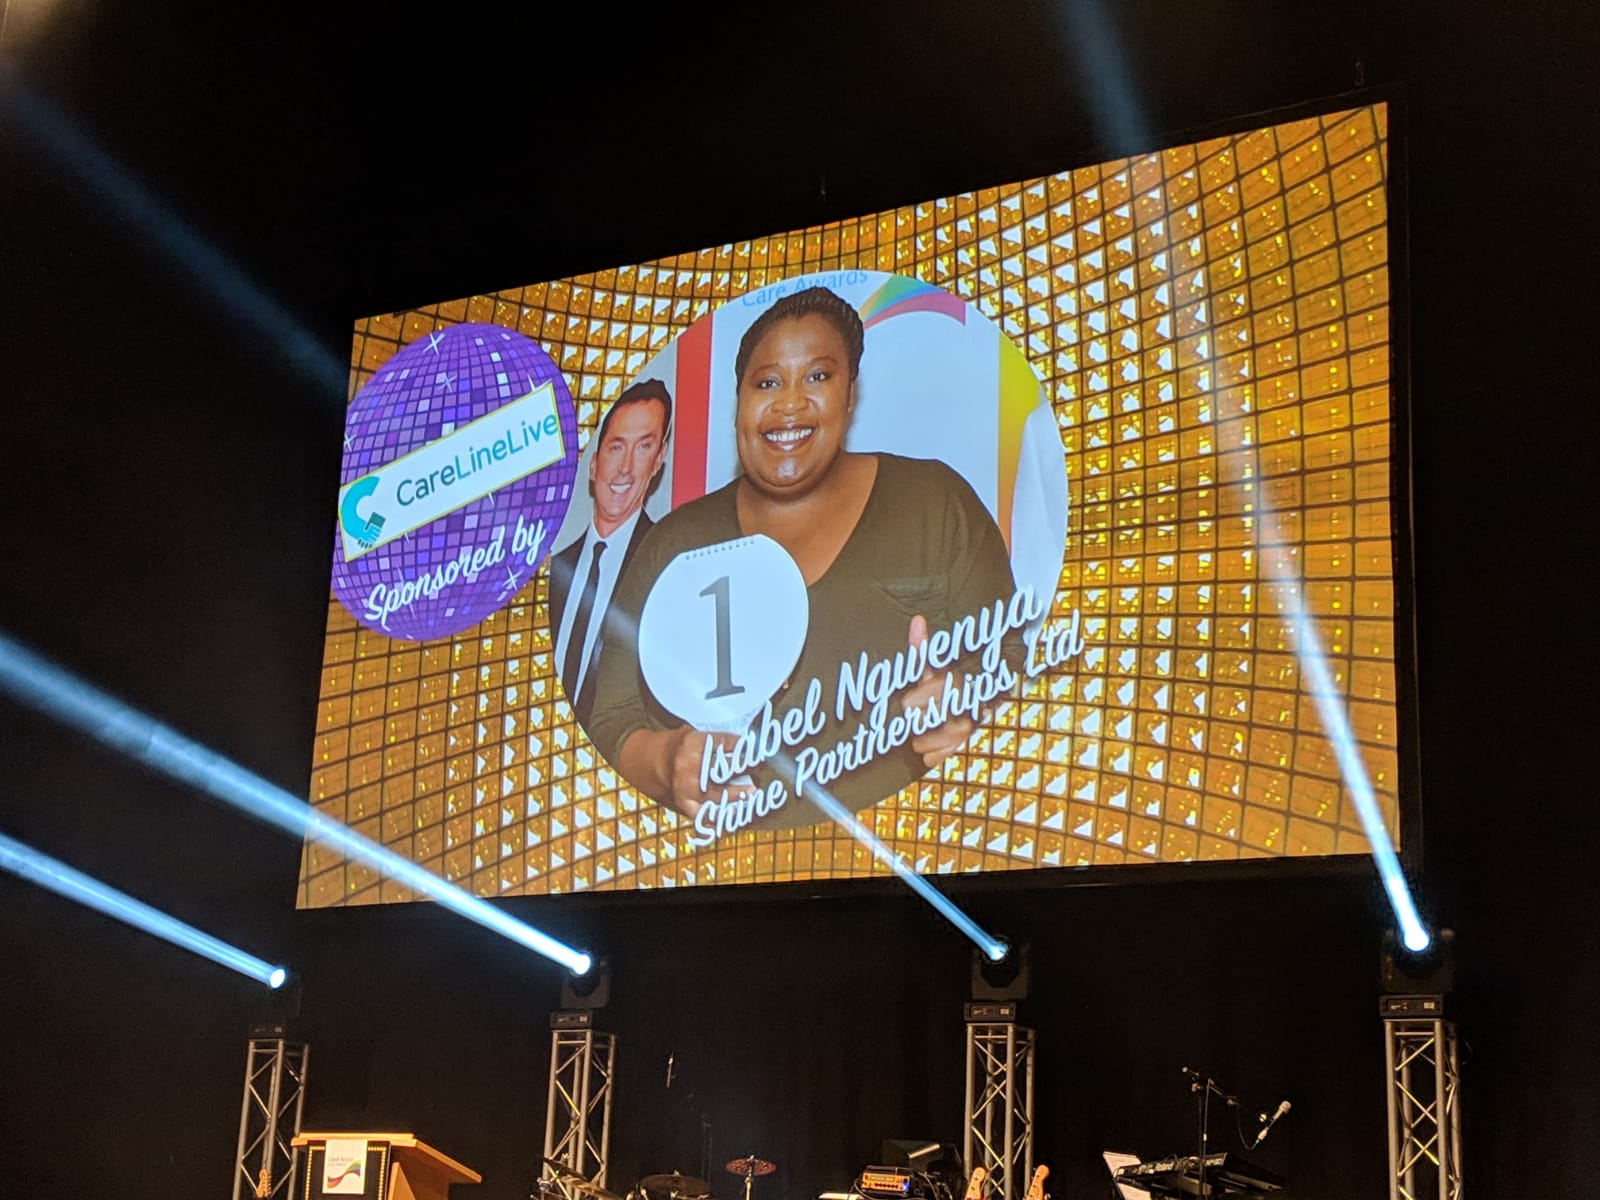 Interview with Isabel Ngwenya, Winner of the Home Care Worker Award at the Great British Care Awards 2019